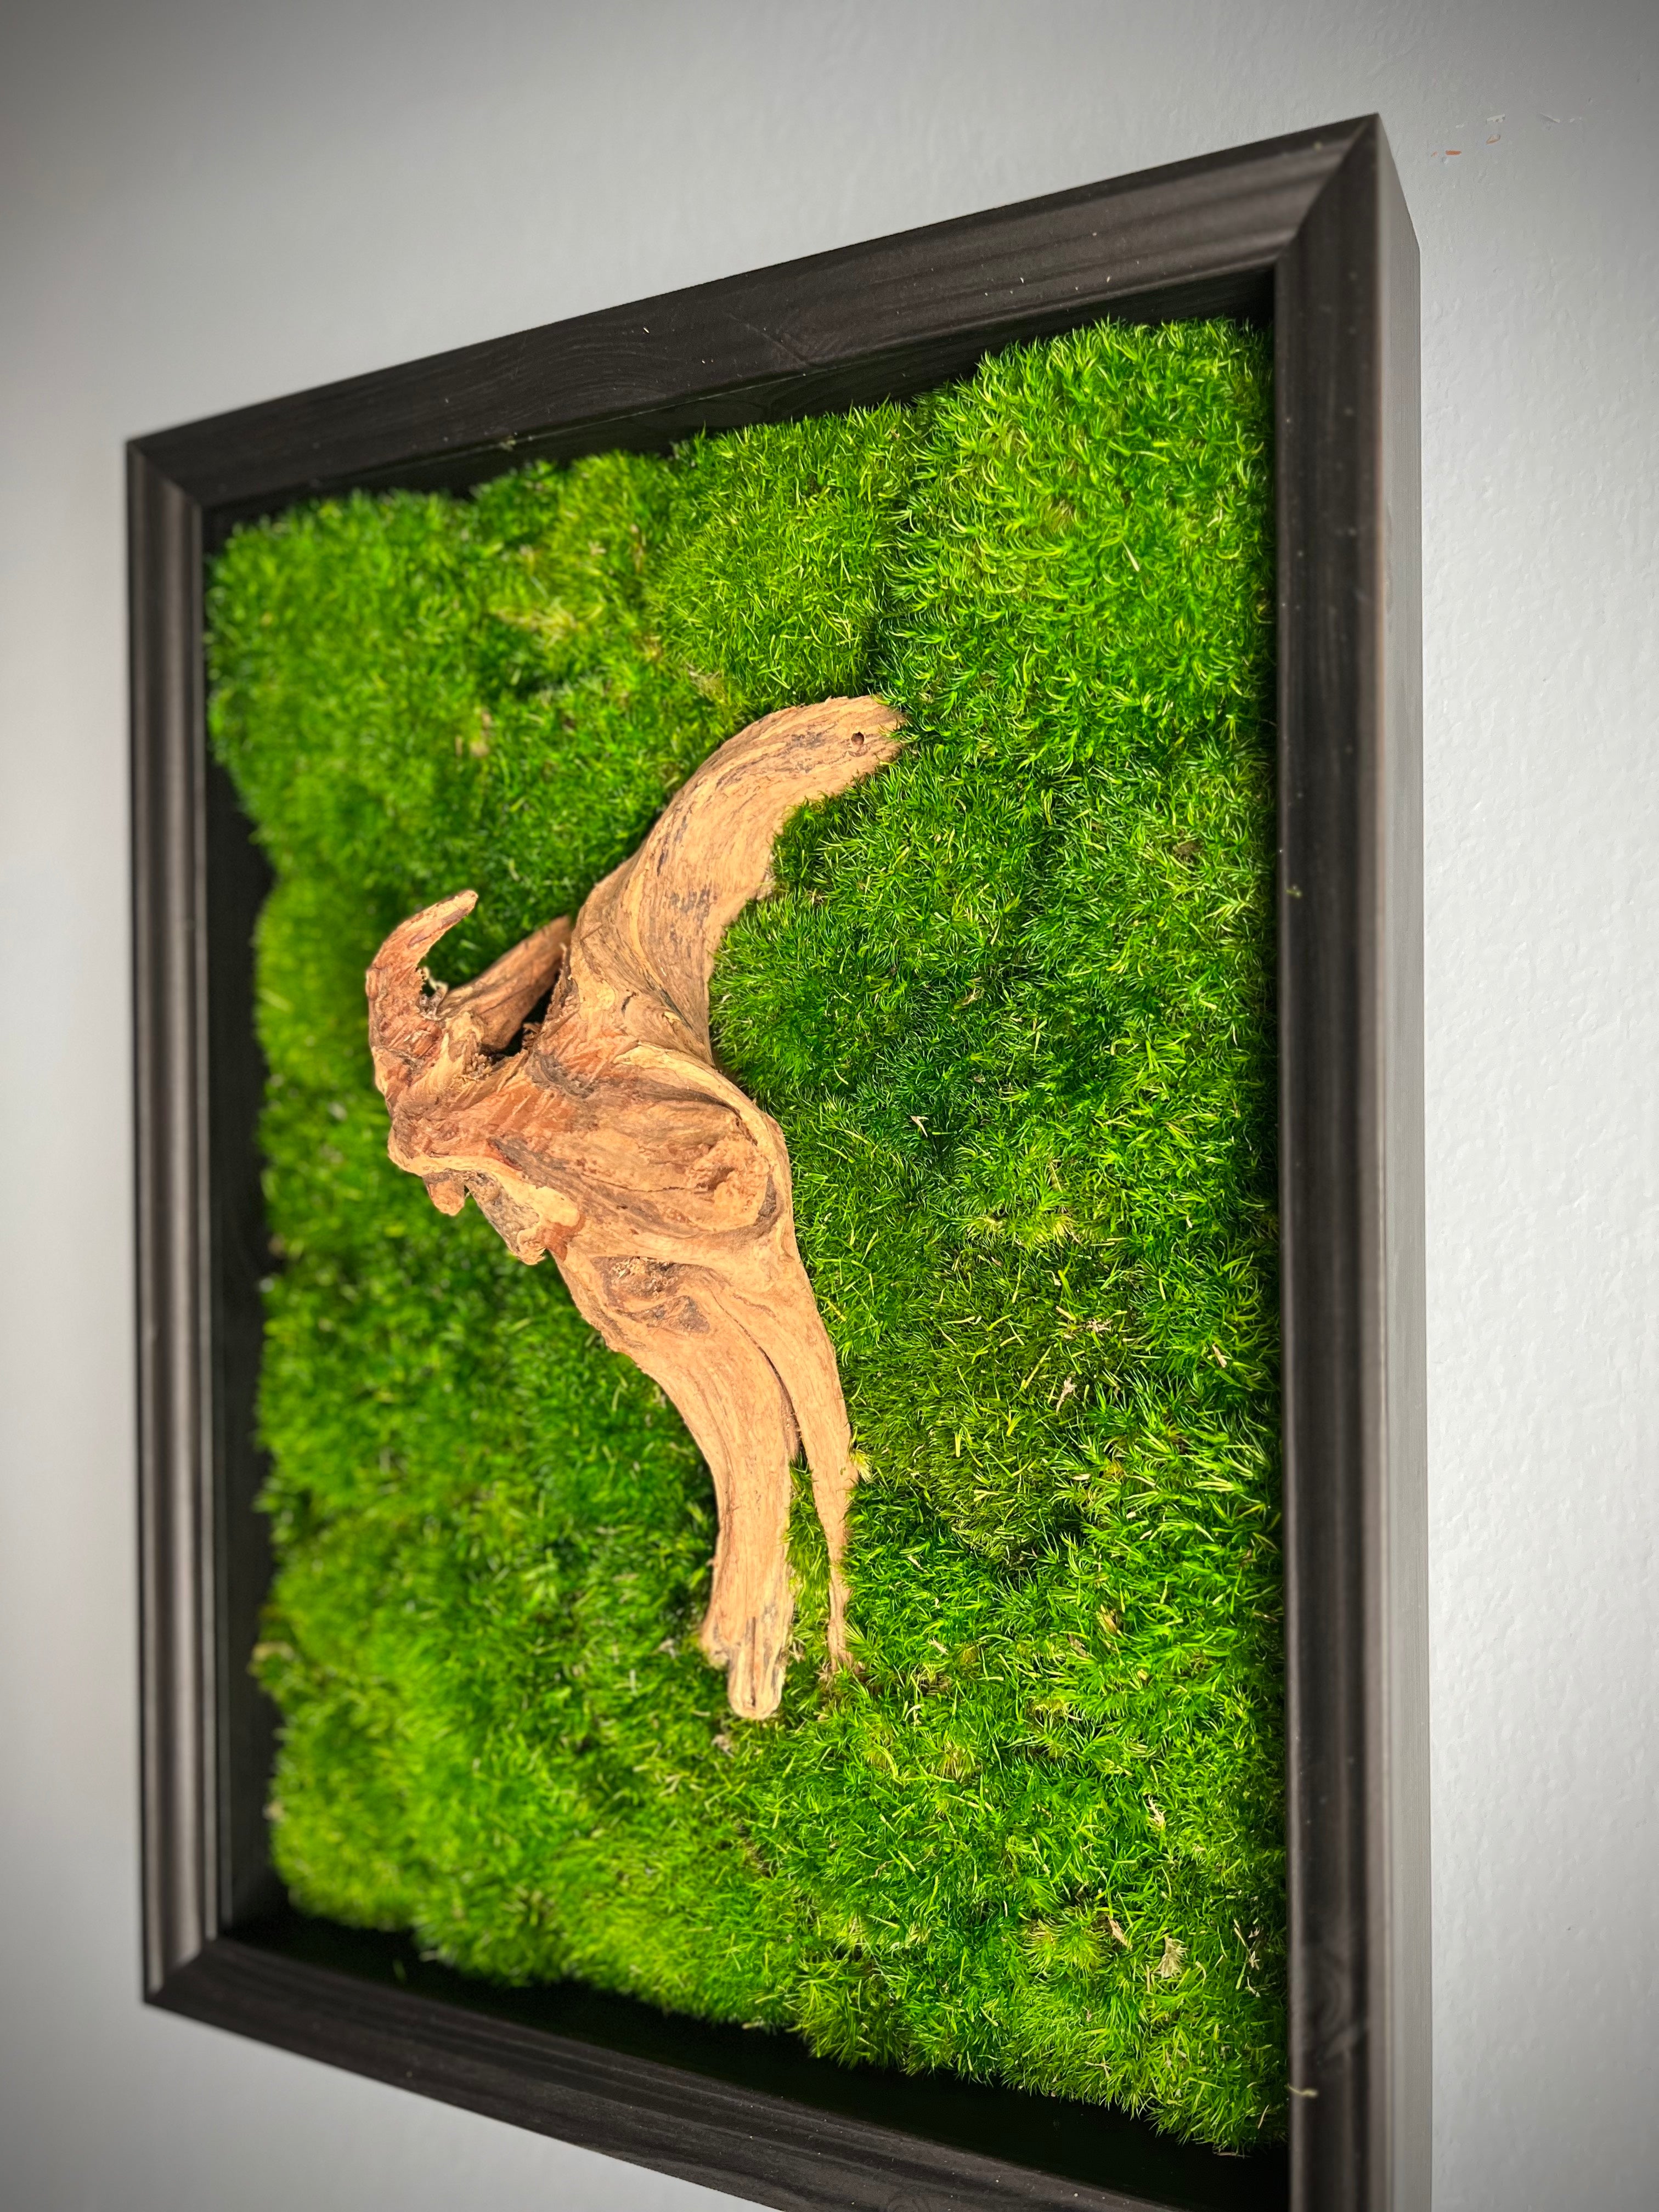 Reflection - Wall Hanging edition (Preserved Plants)